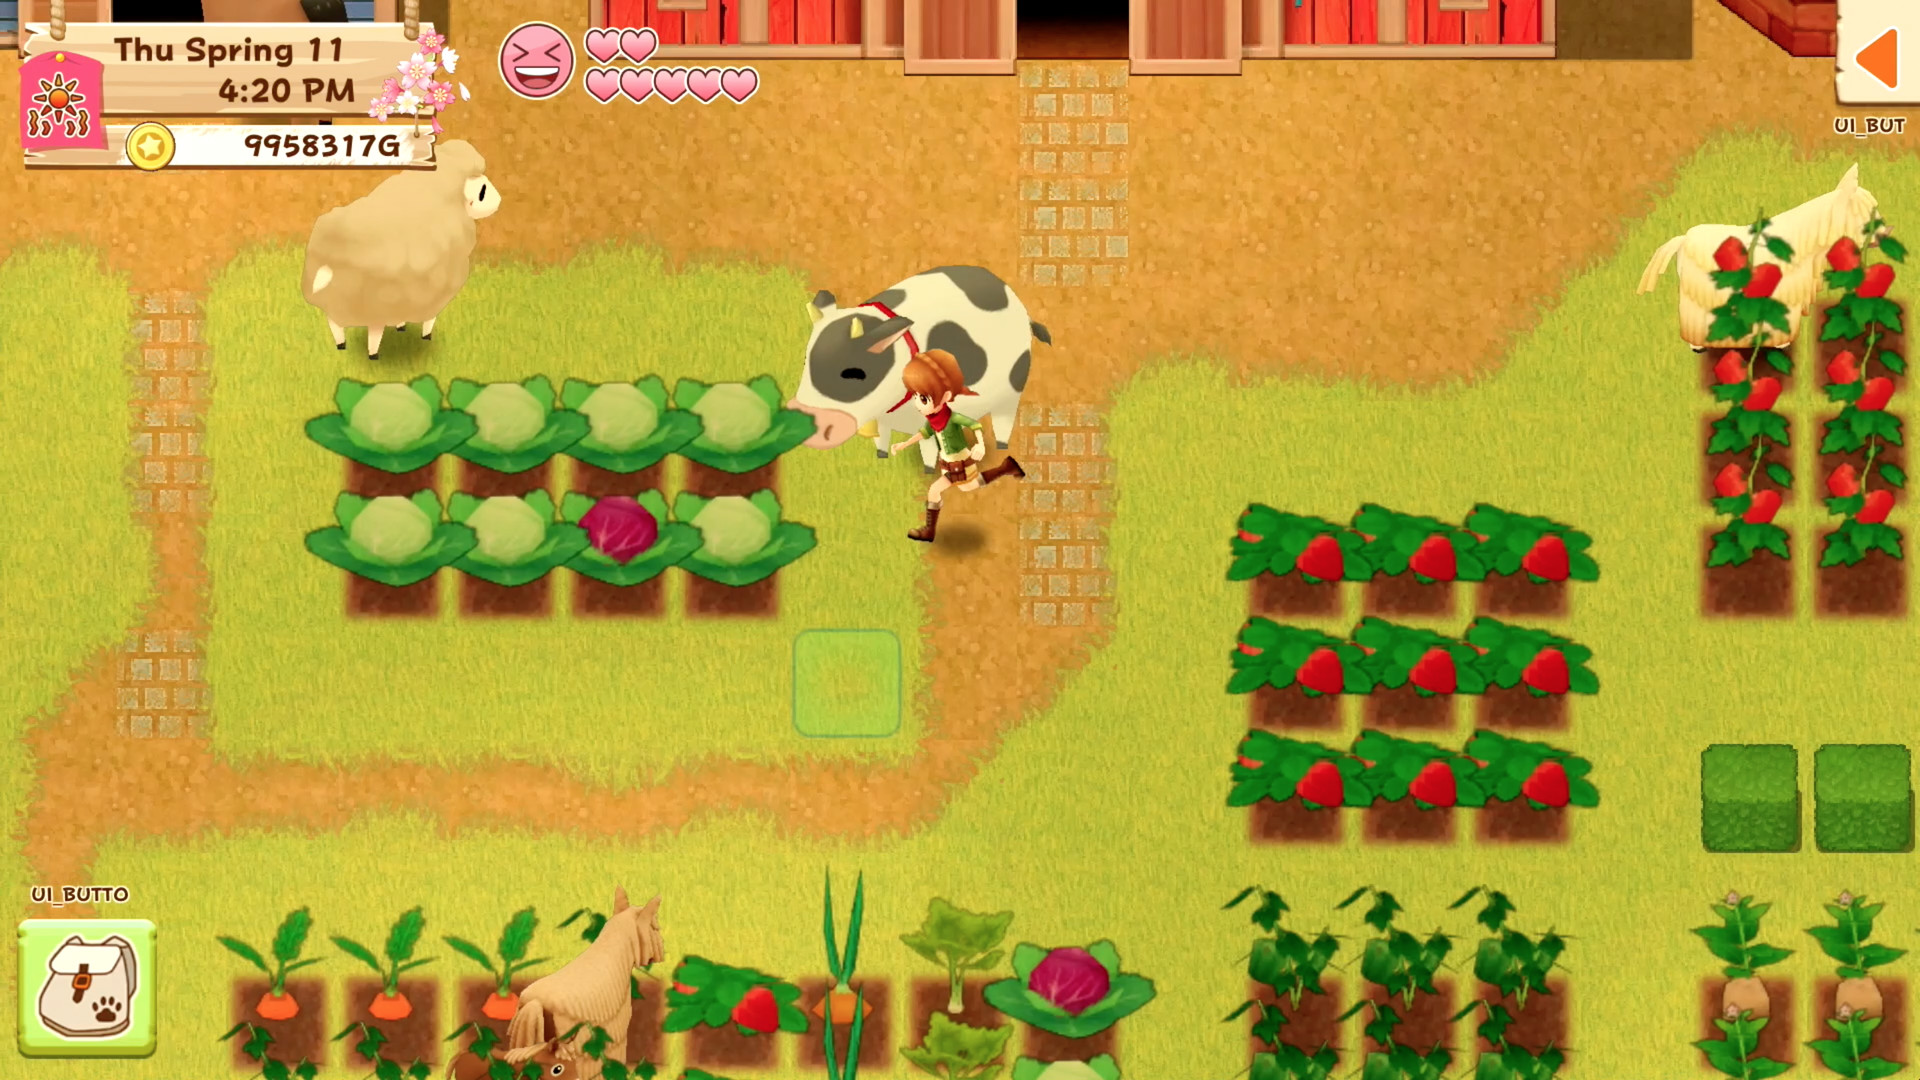 harvest moon coming to switch